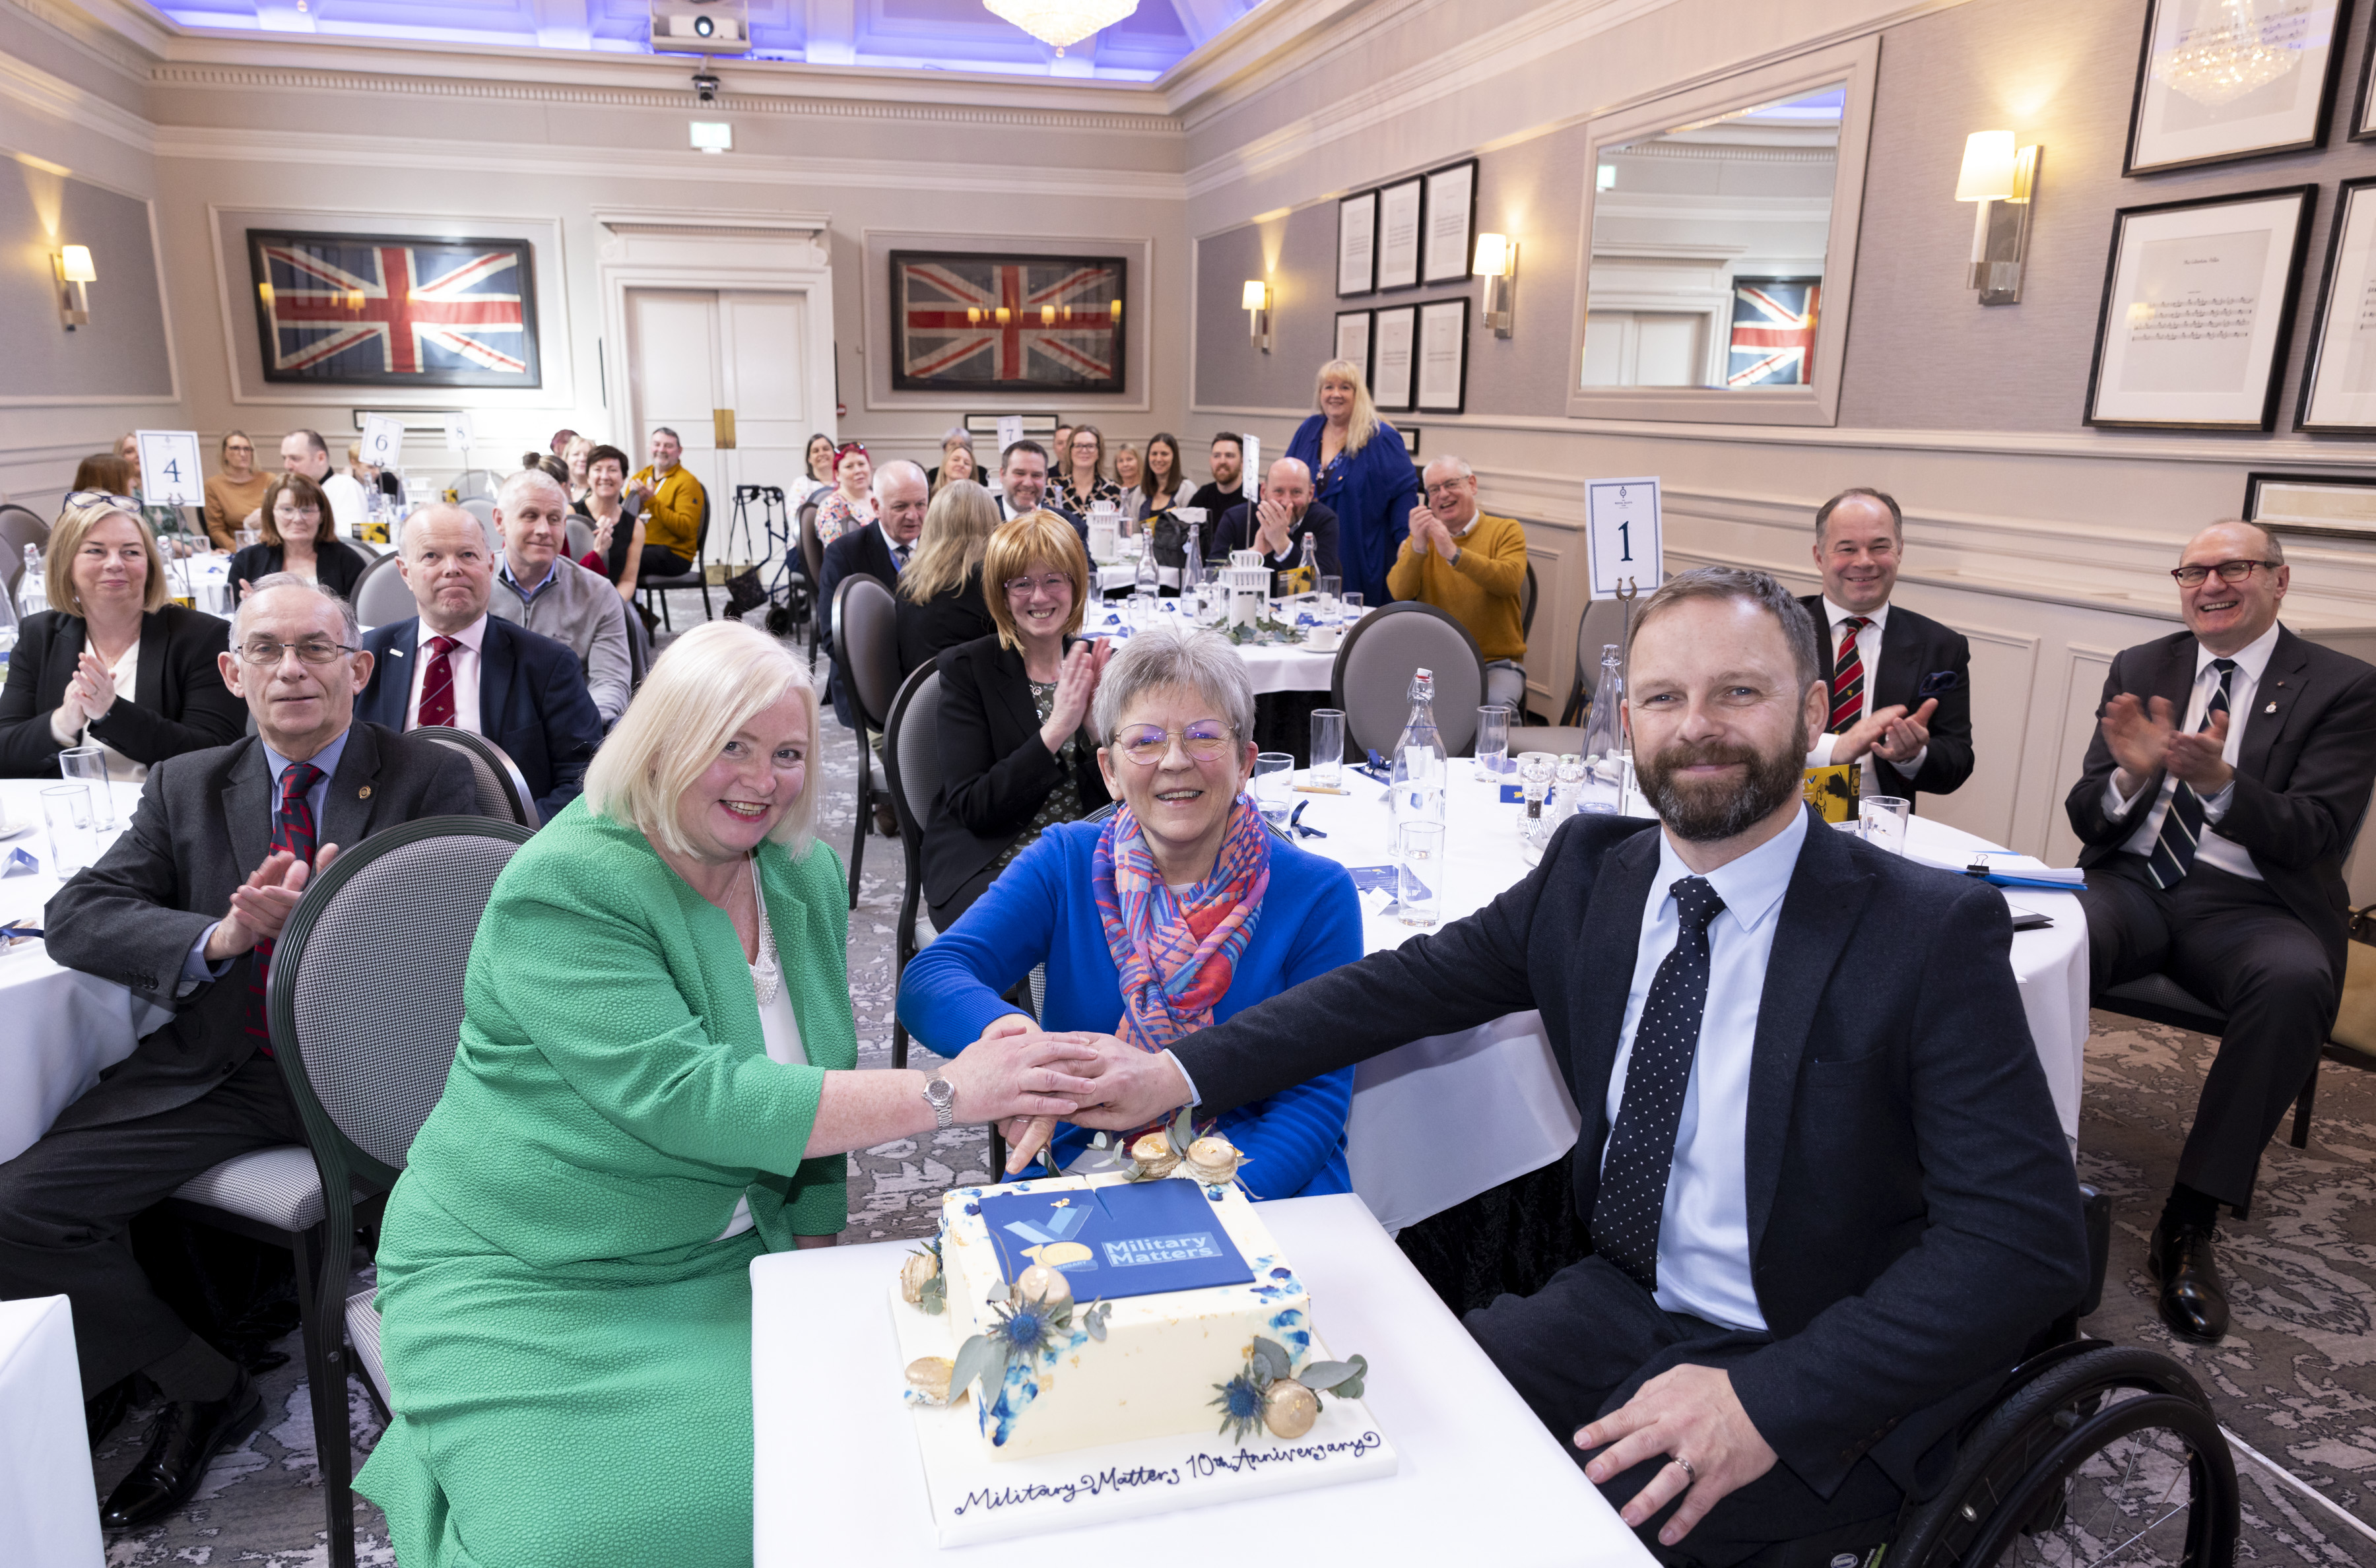 Housing Options Scotland’s Military Matters service celebrates 10 years of helping veterans